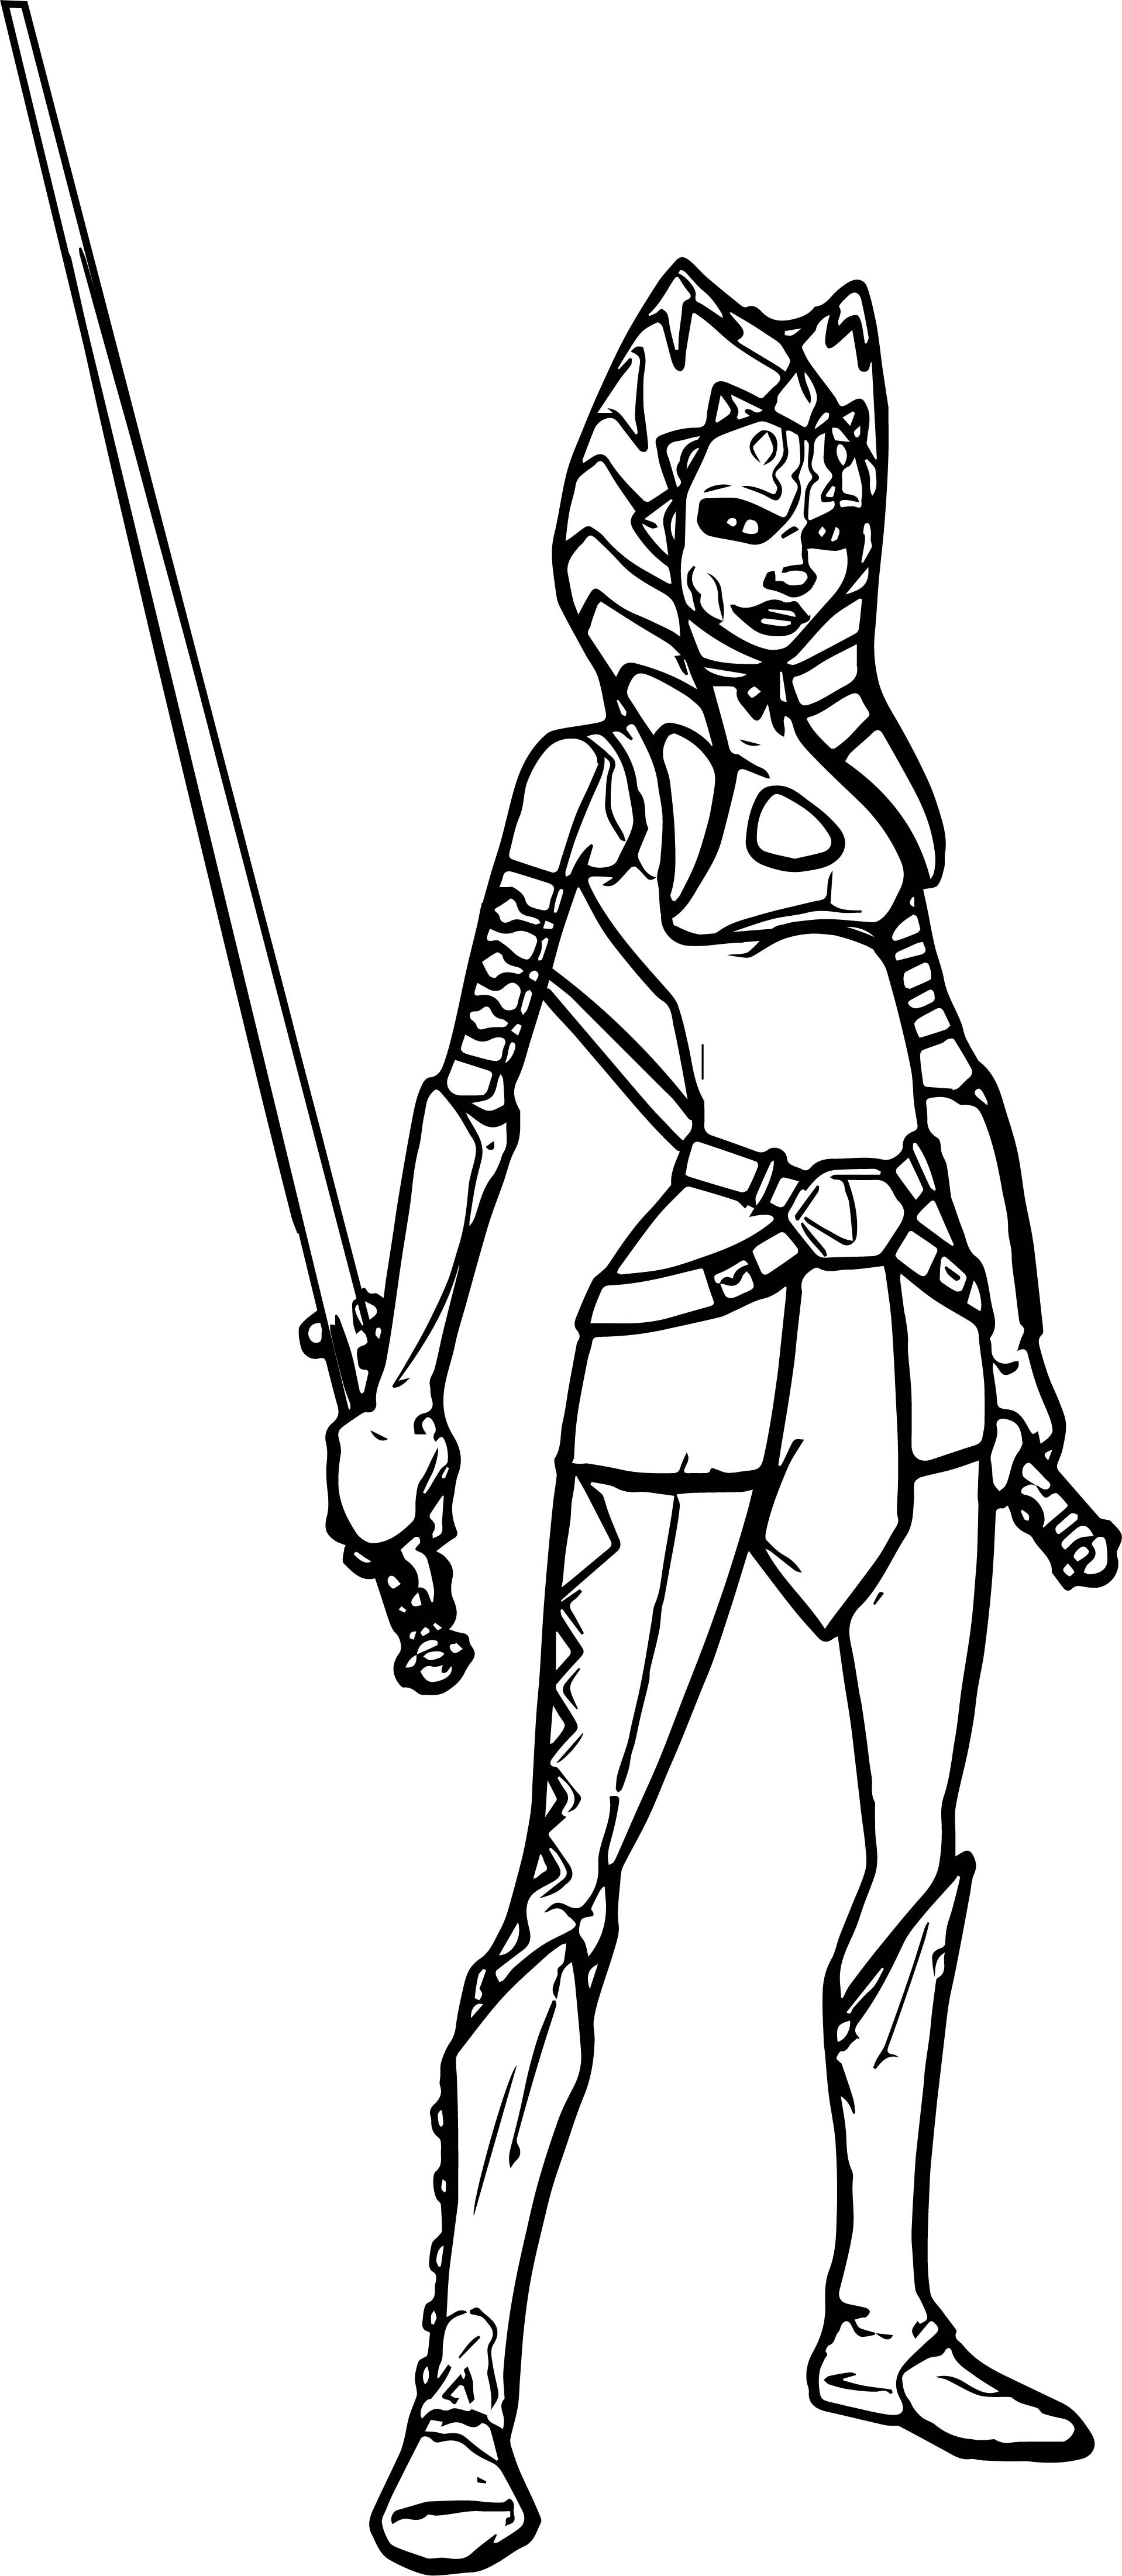 Ahsoka Tano Coloring Pages | www.topsimages.com